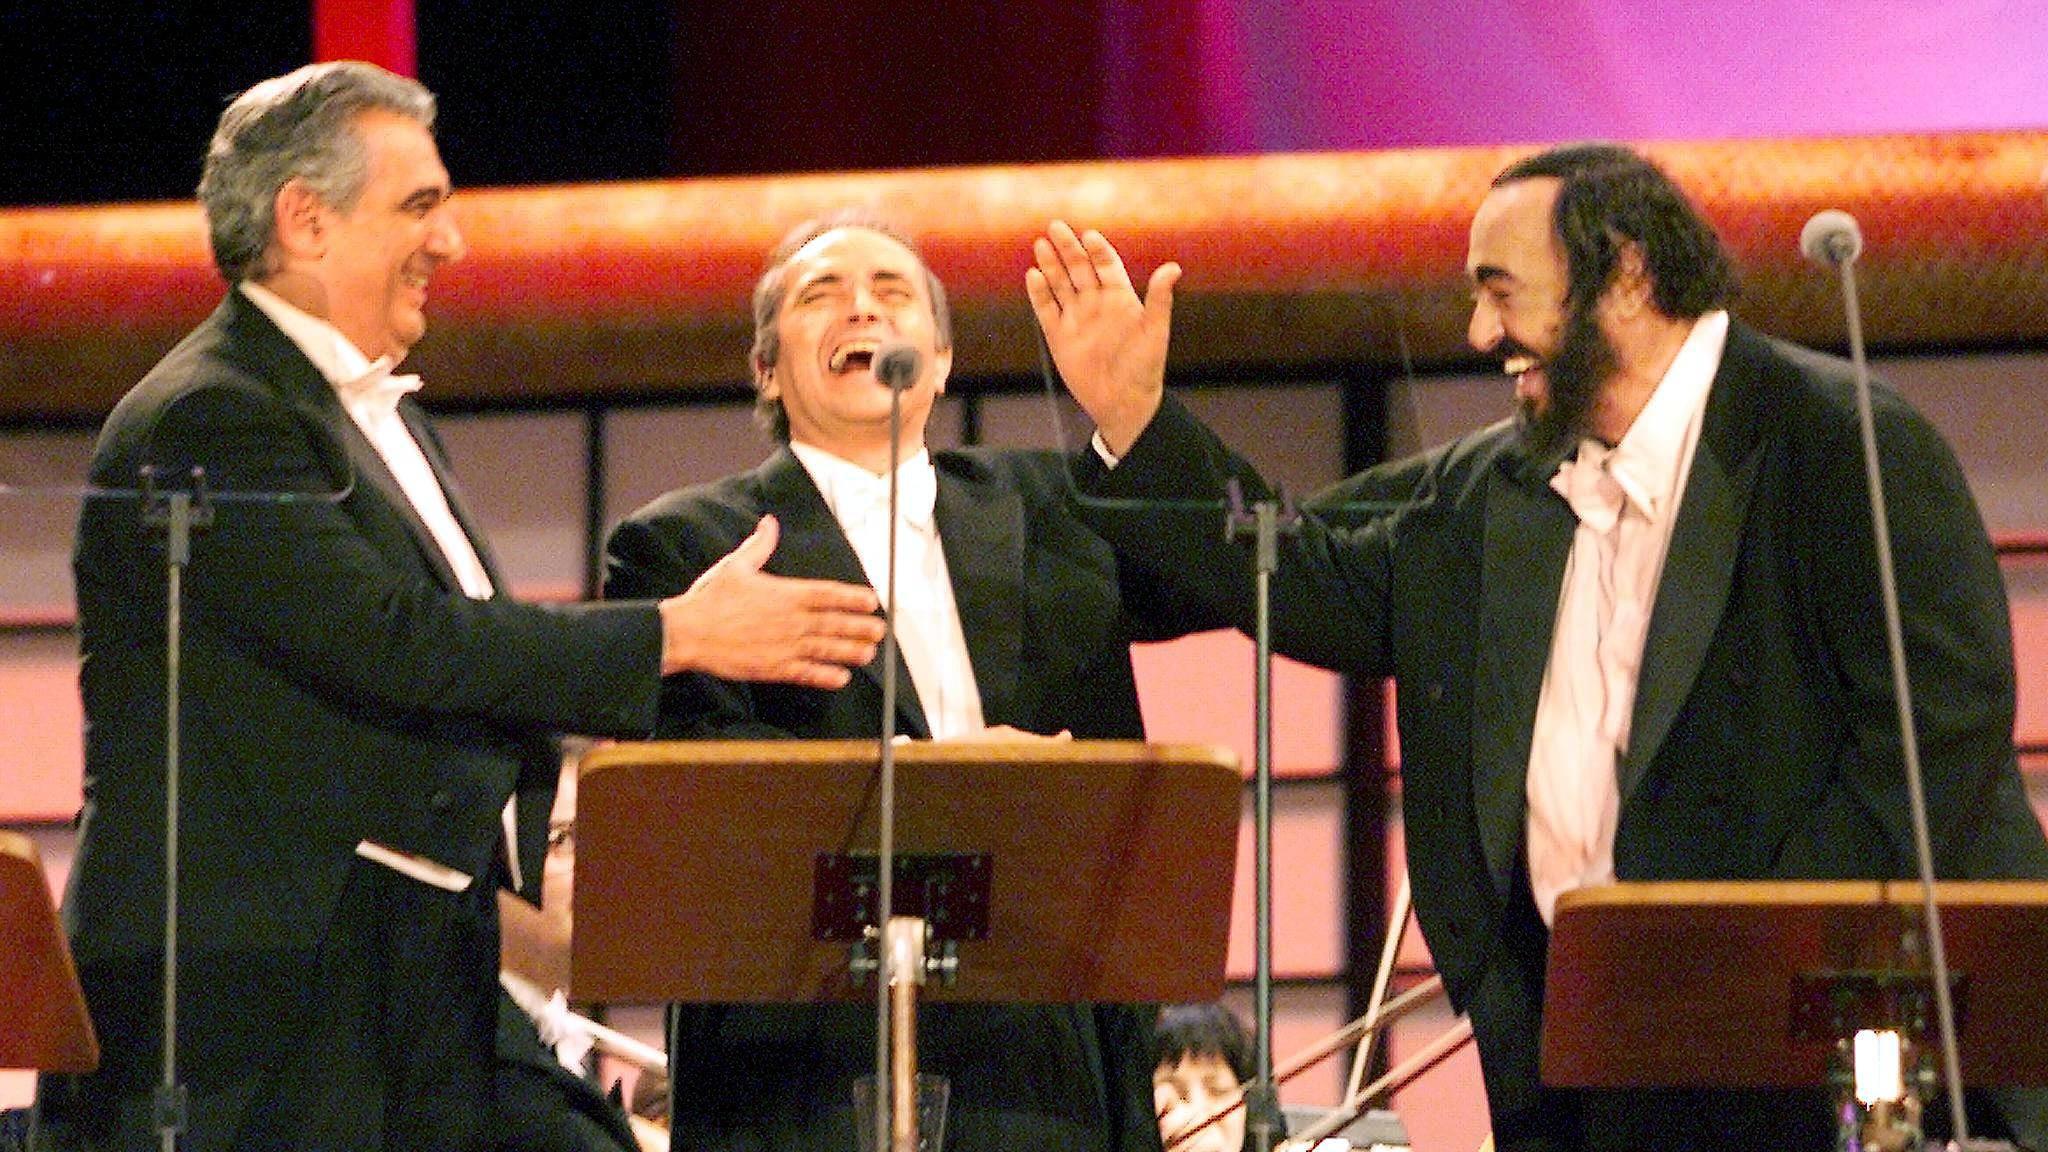 How come Pavarotti always gets the girl? Here's how tenors became